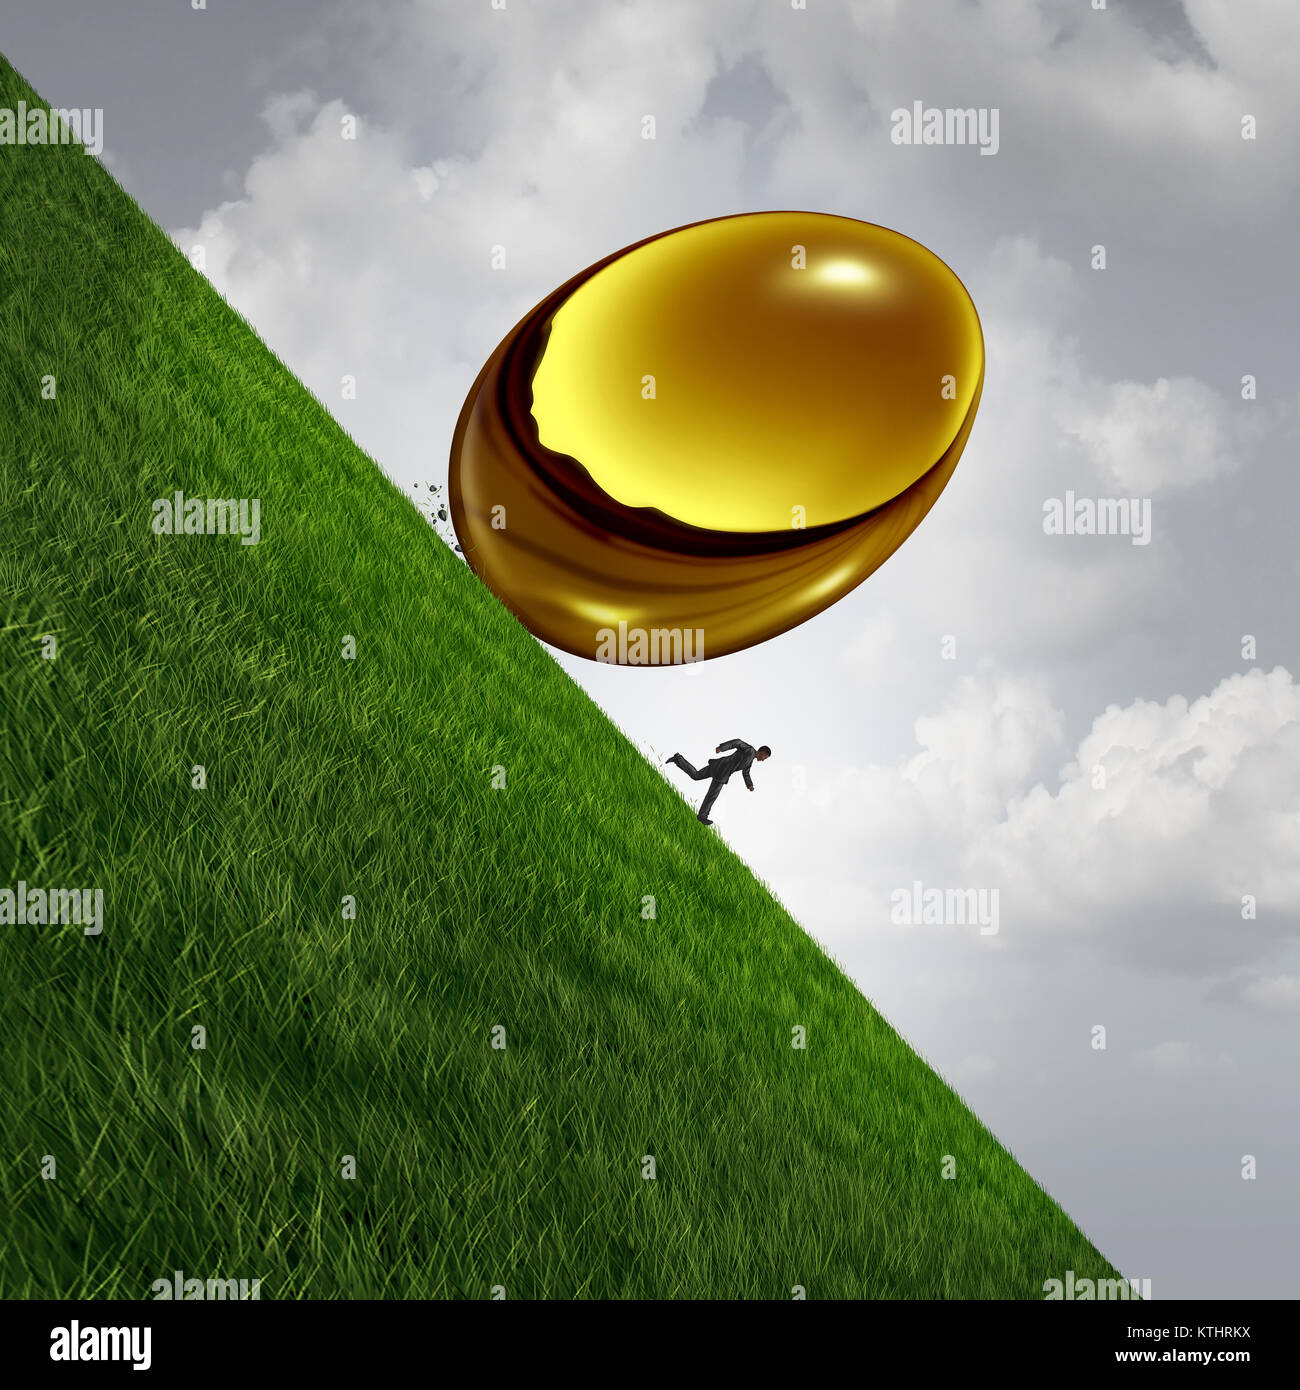 Retirement investment fund trouble crisis concept as a gold or golden egg falling rolling down hill as a financial retiring senior stress symbol. Stock Photo